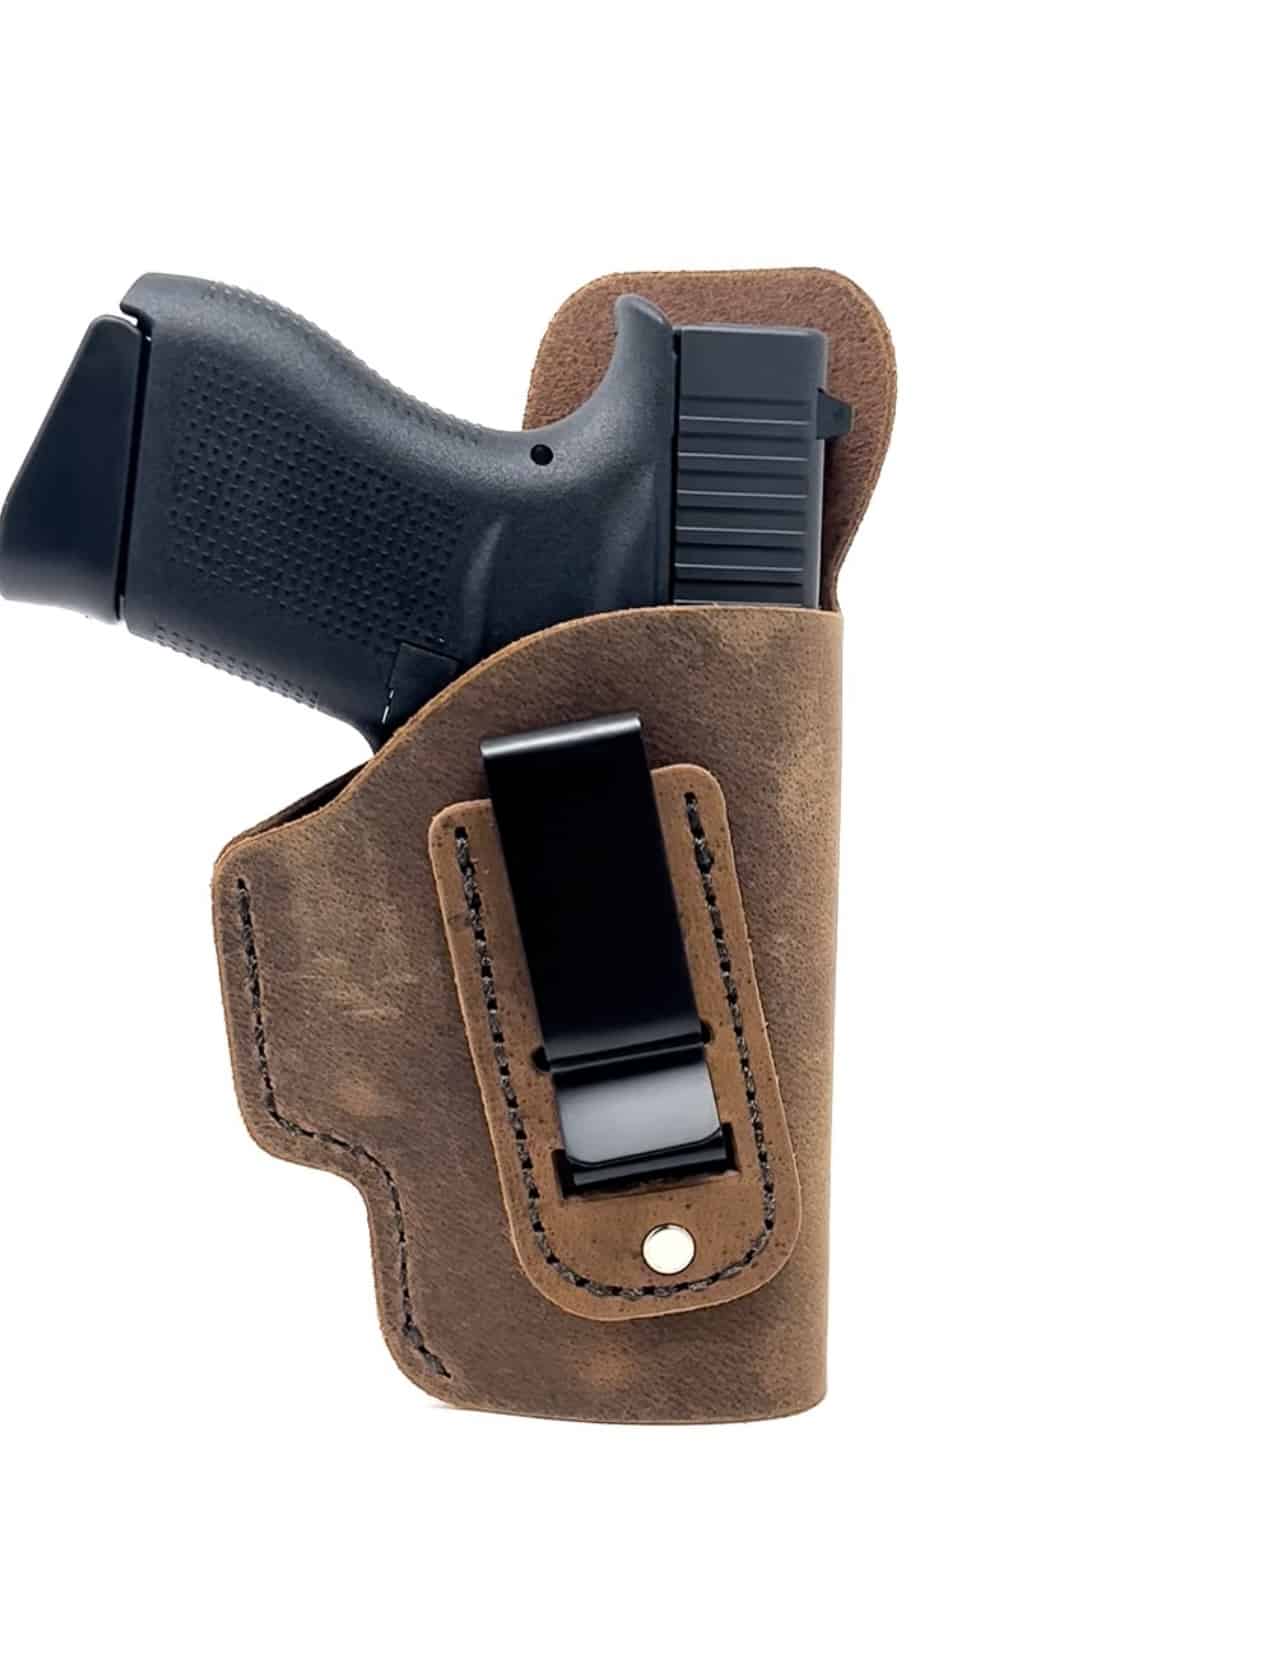 TAGUA Kydex Inside Pants Appendix and Cross-Draw Holster for GLOCK 26 27 33 